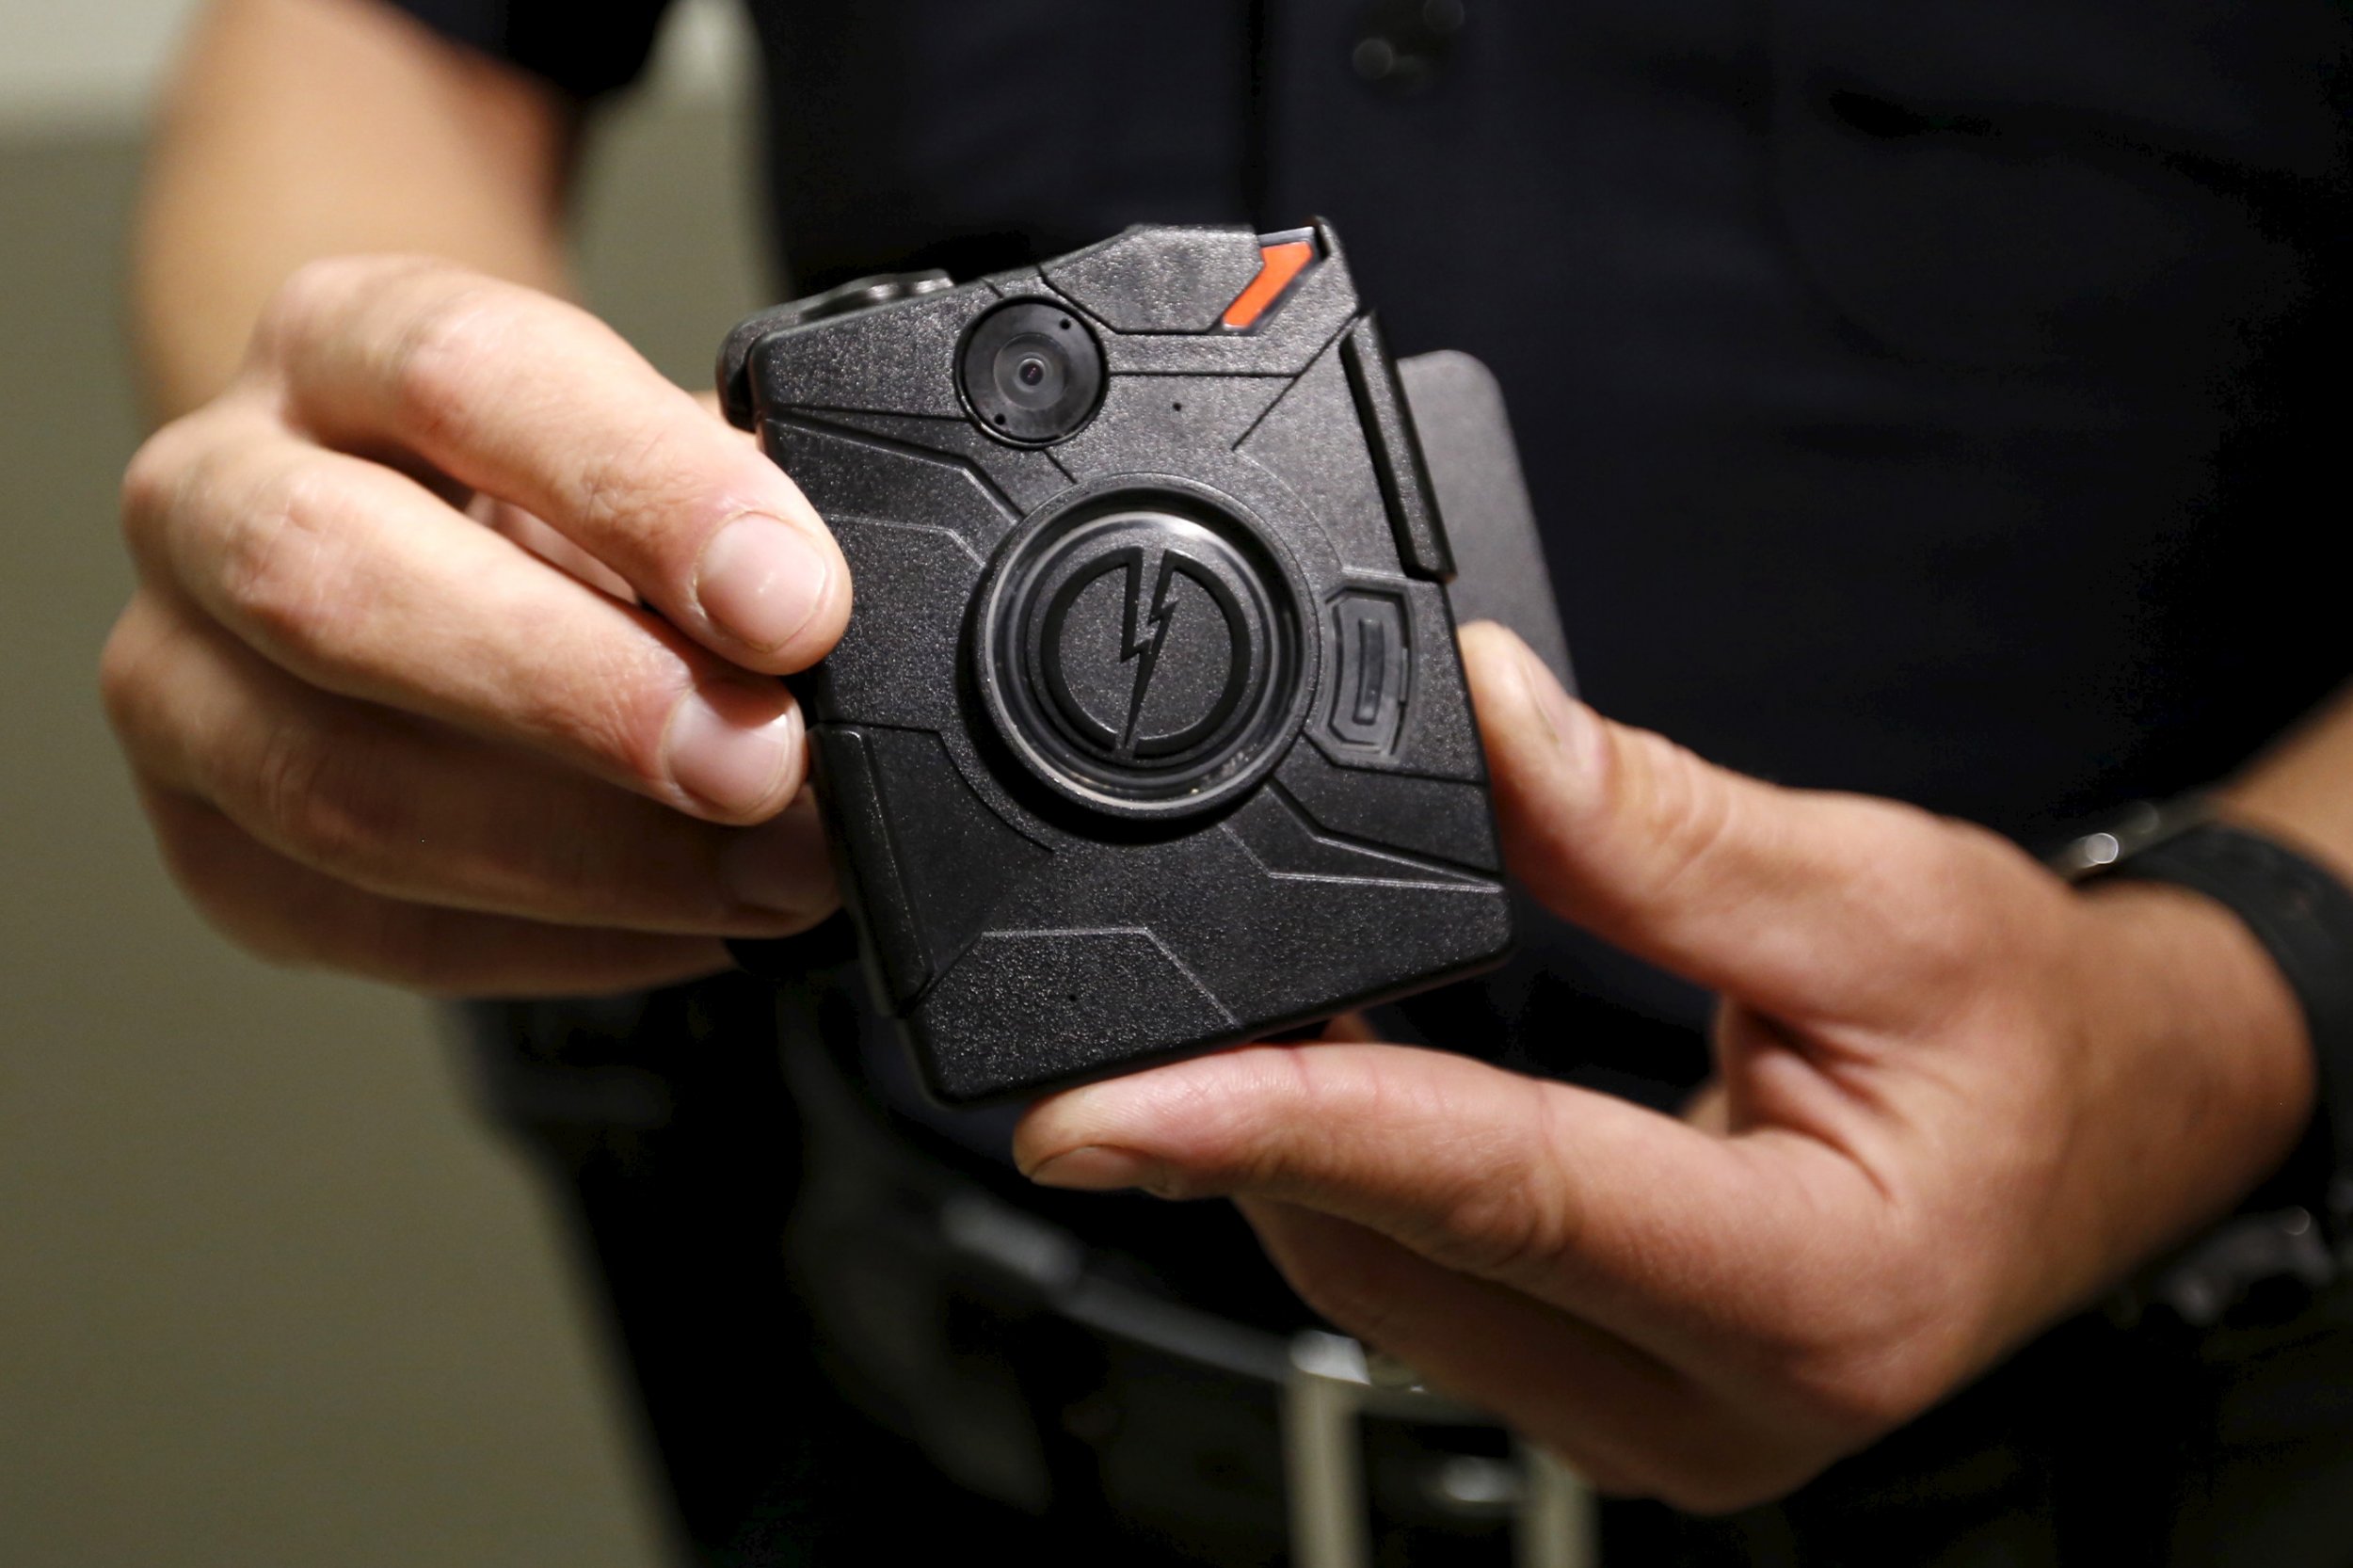 has obama spent money on body cameras for police officers